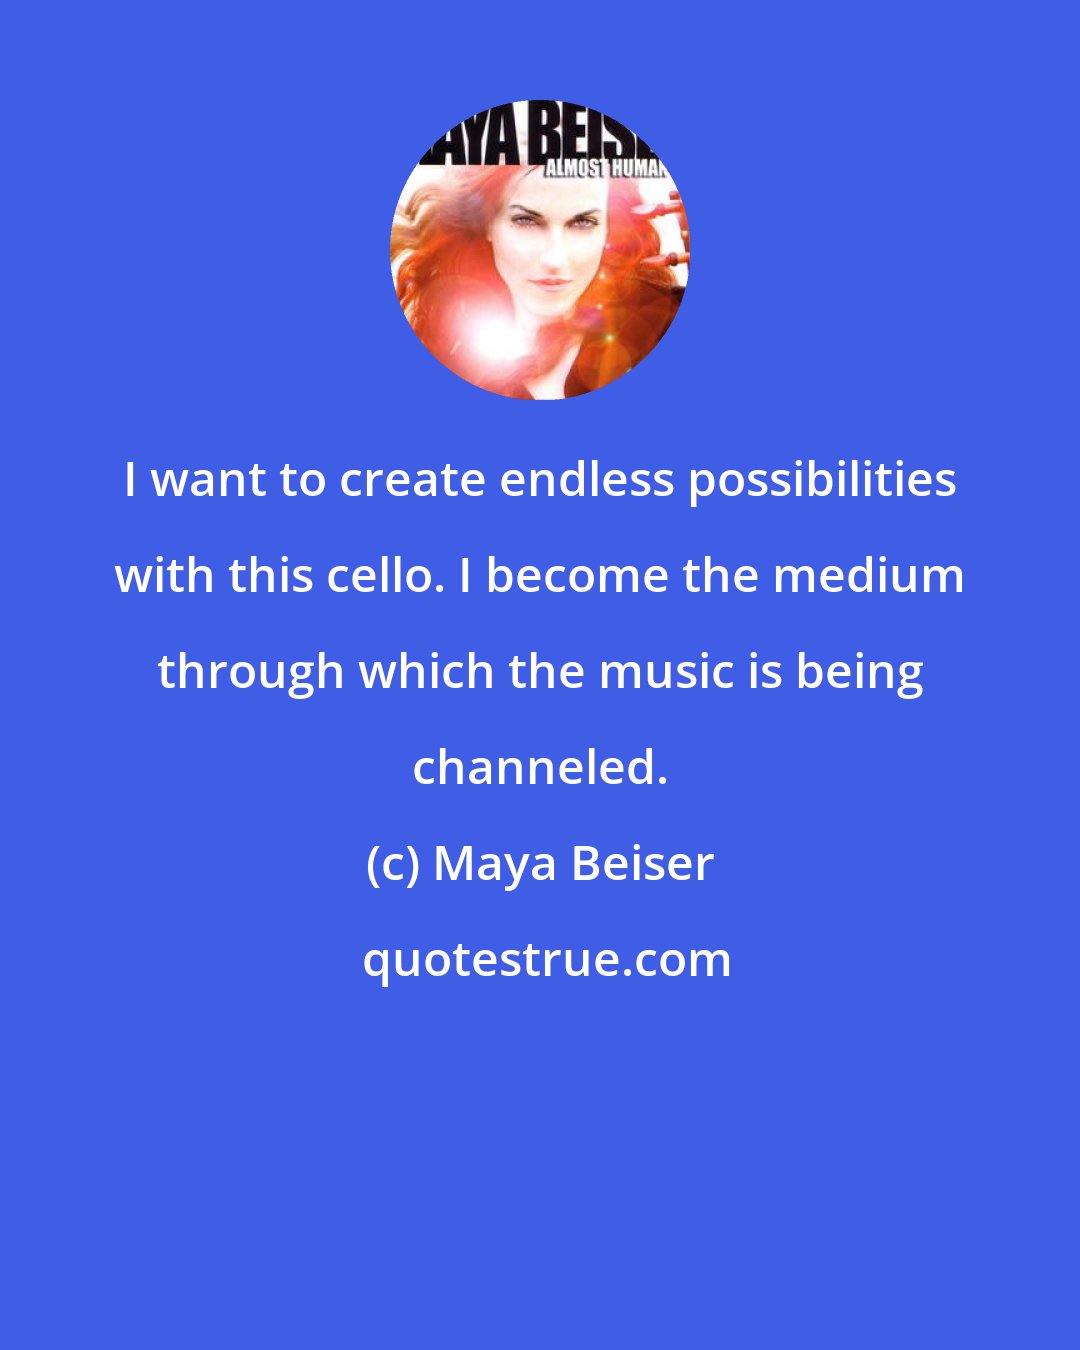 Maya Beiser: I want to create endless possibilities with this cello. I become the medium through which the music is being channeled.